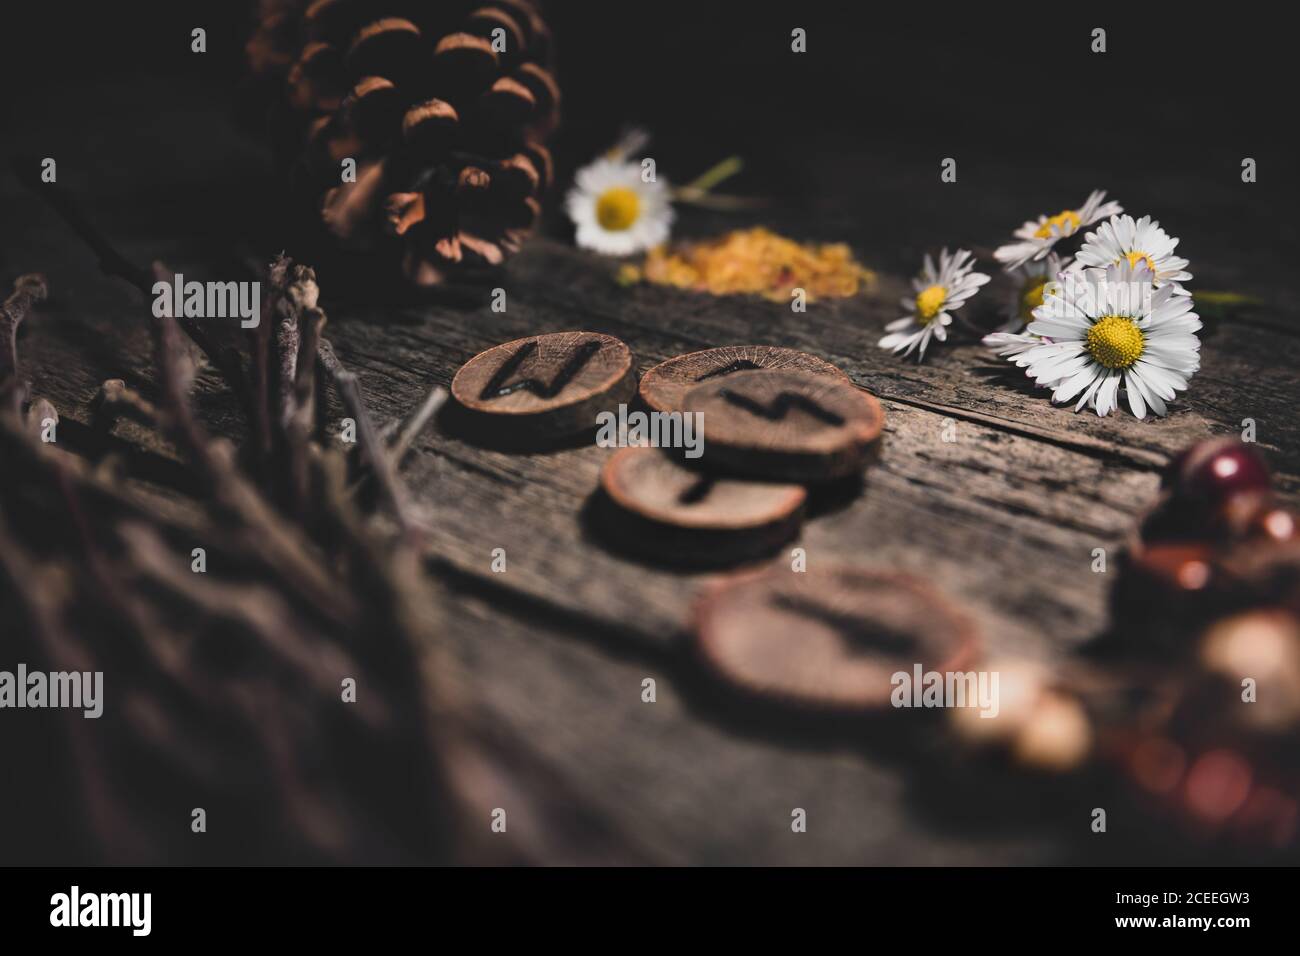 Natural esoteric background with elder runes or futhark, flowers and cones, wooden table Stock Photo